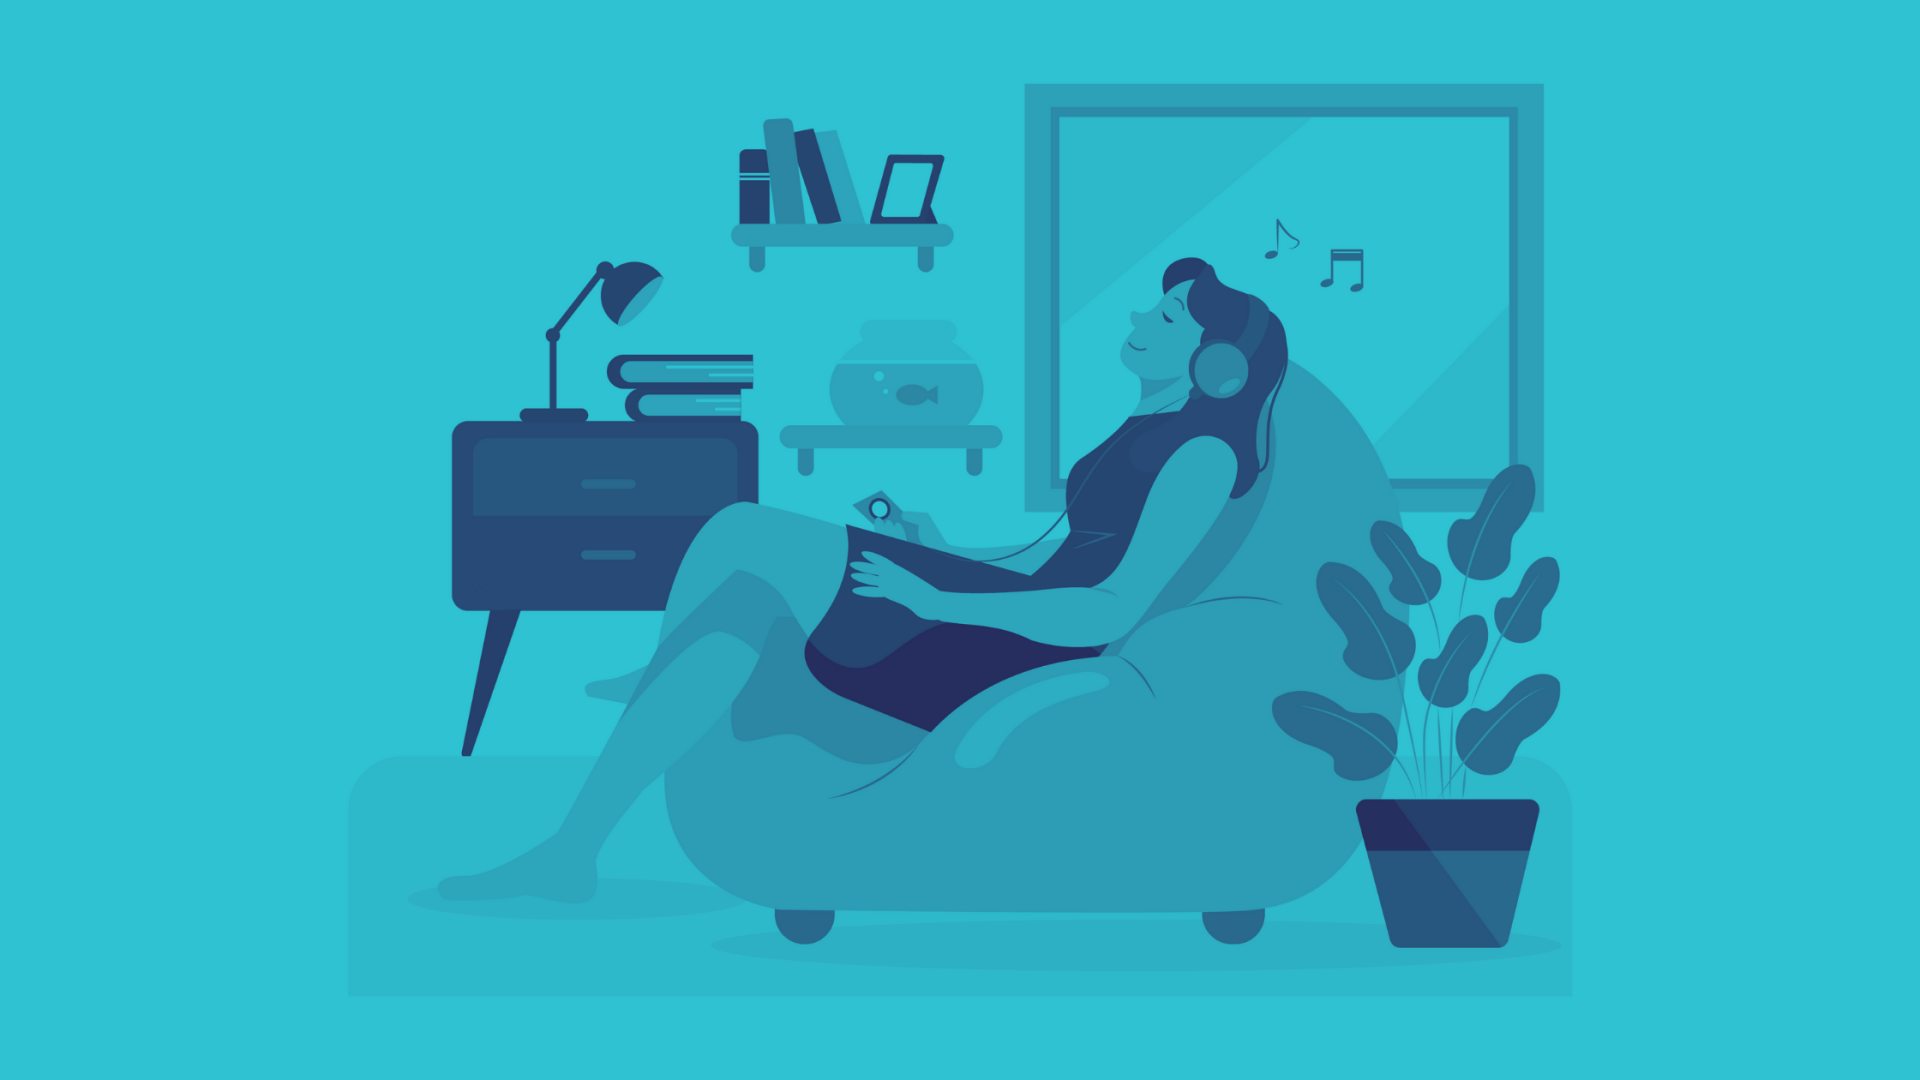 lady sitting and relaxing on a sofa. All image's shades are in blue